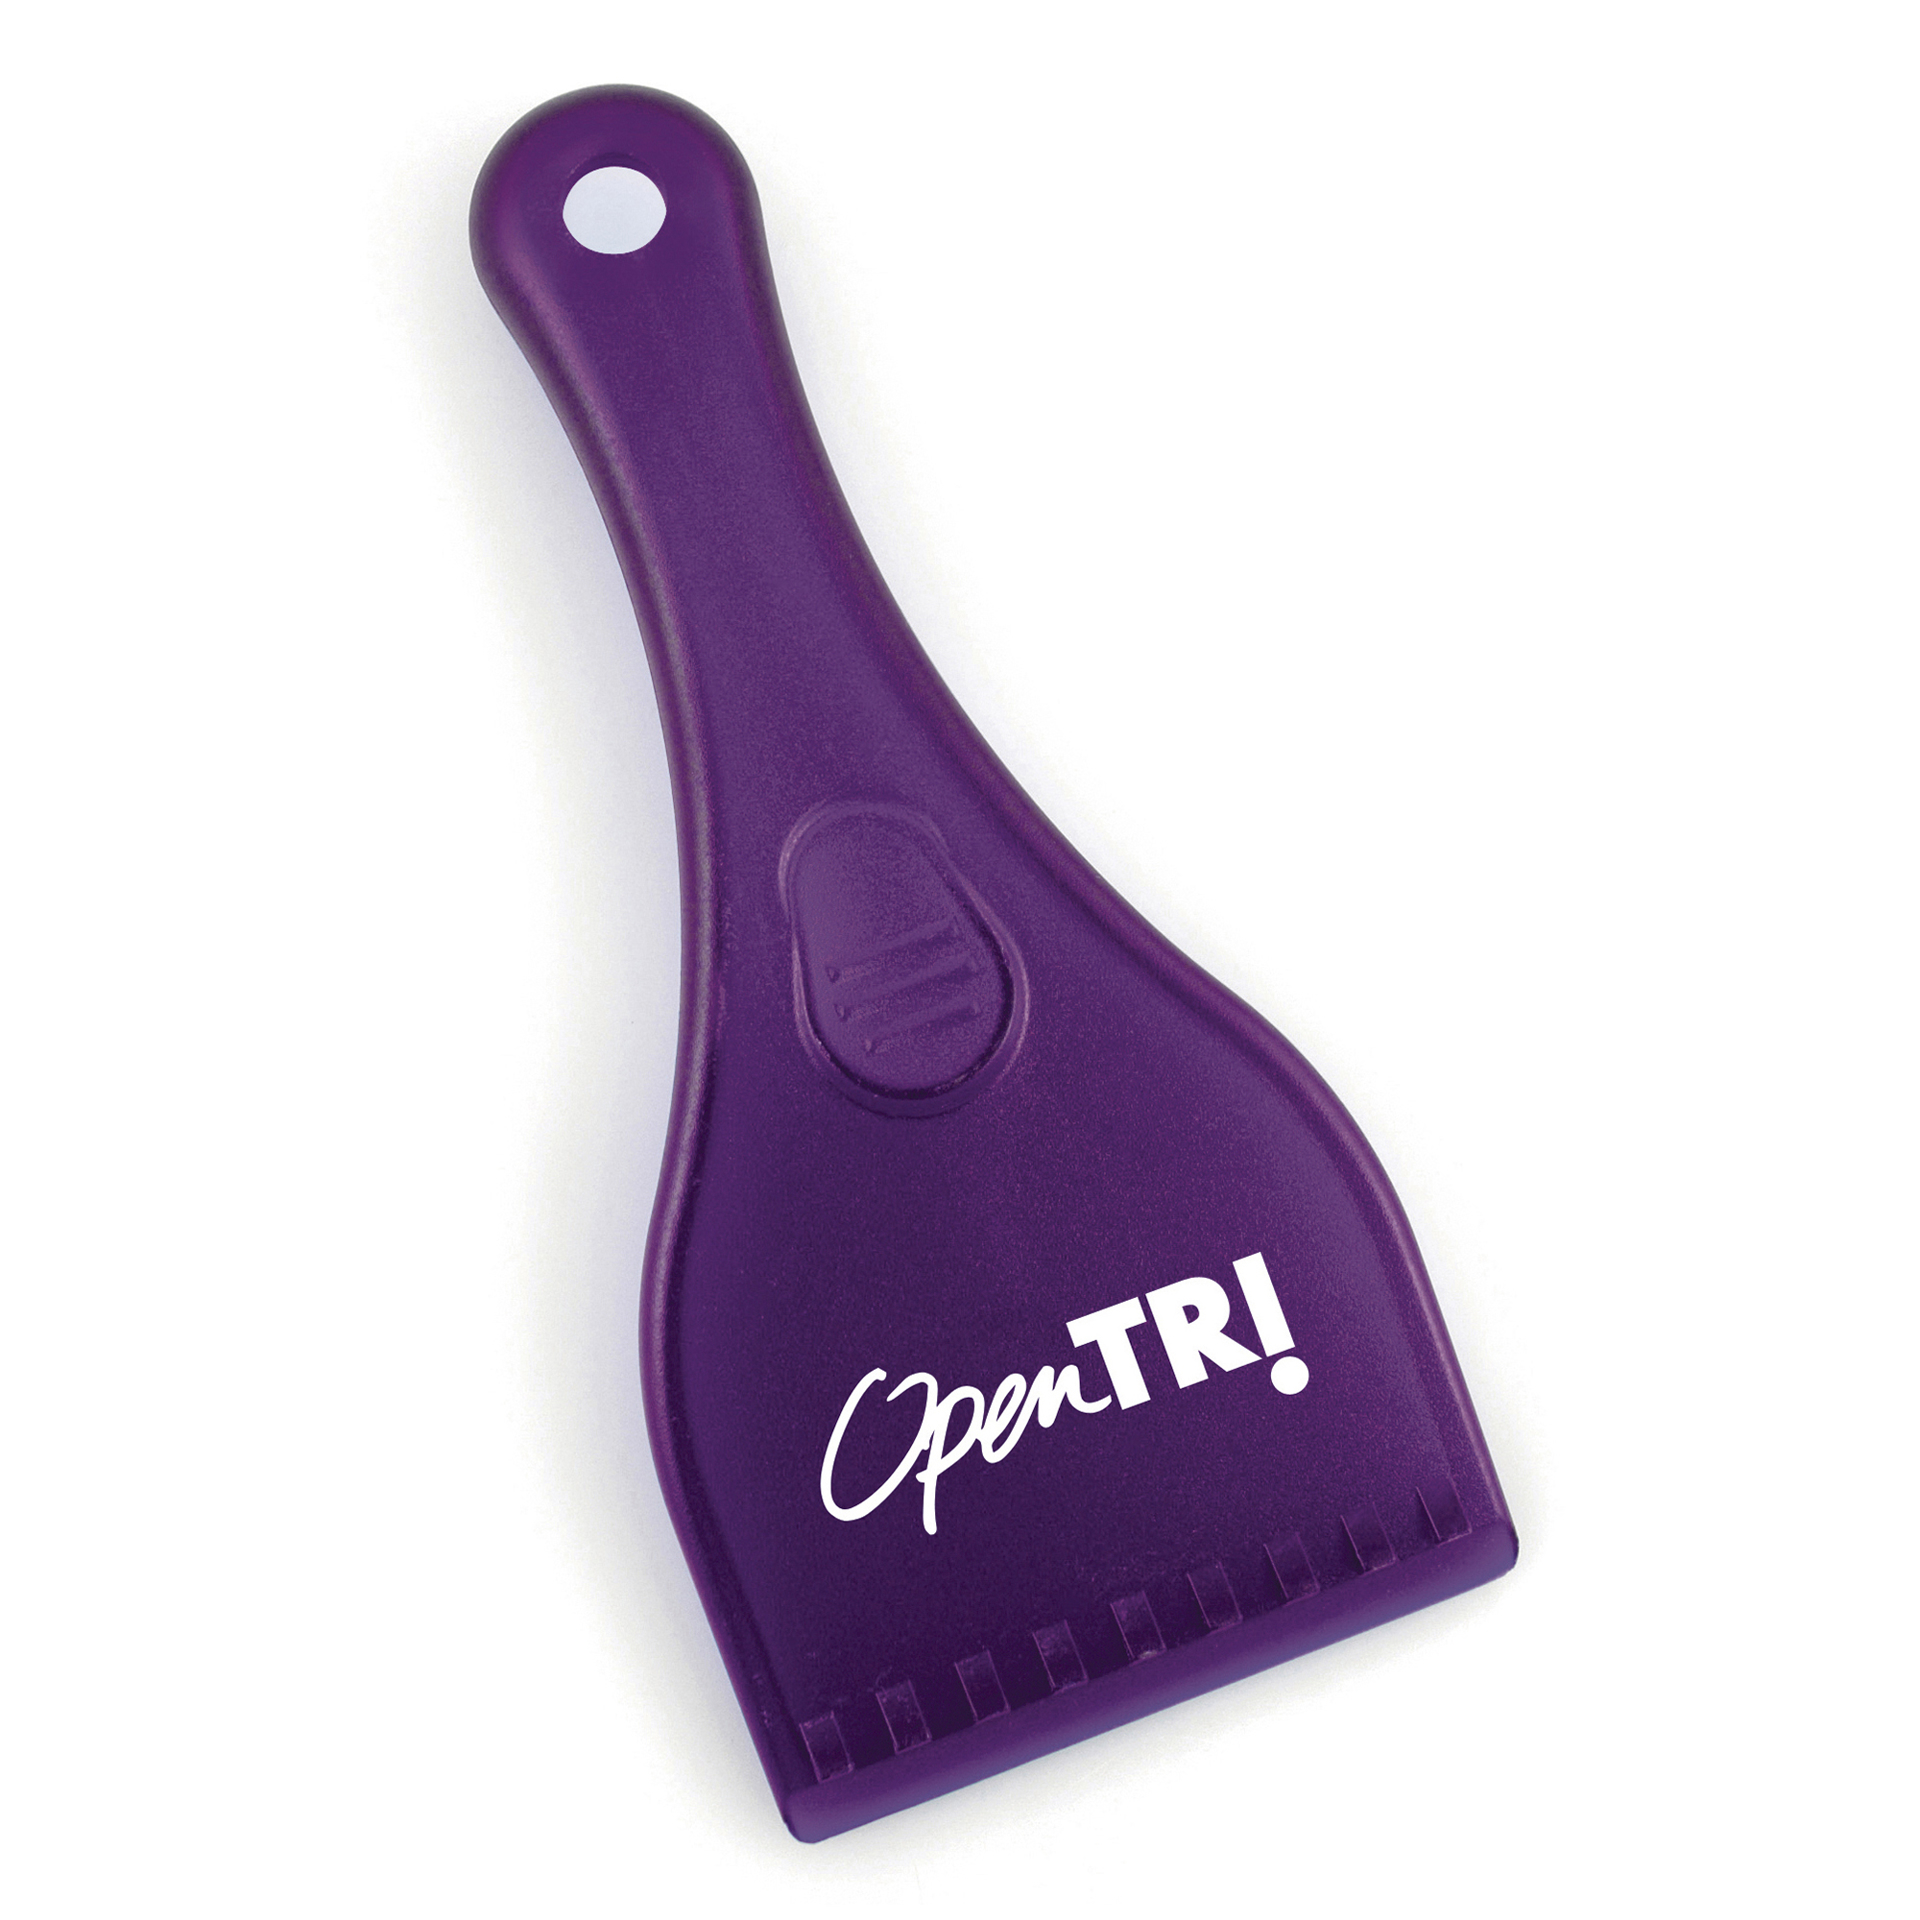 ice scraper with handle in purple with a white logo